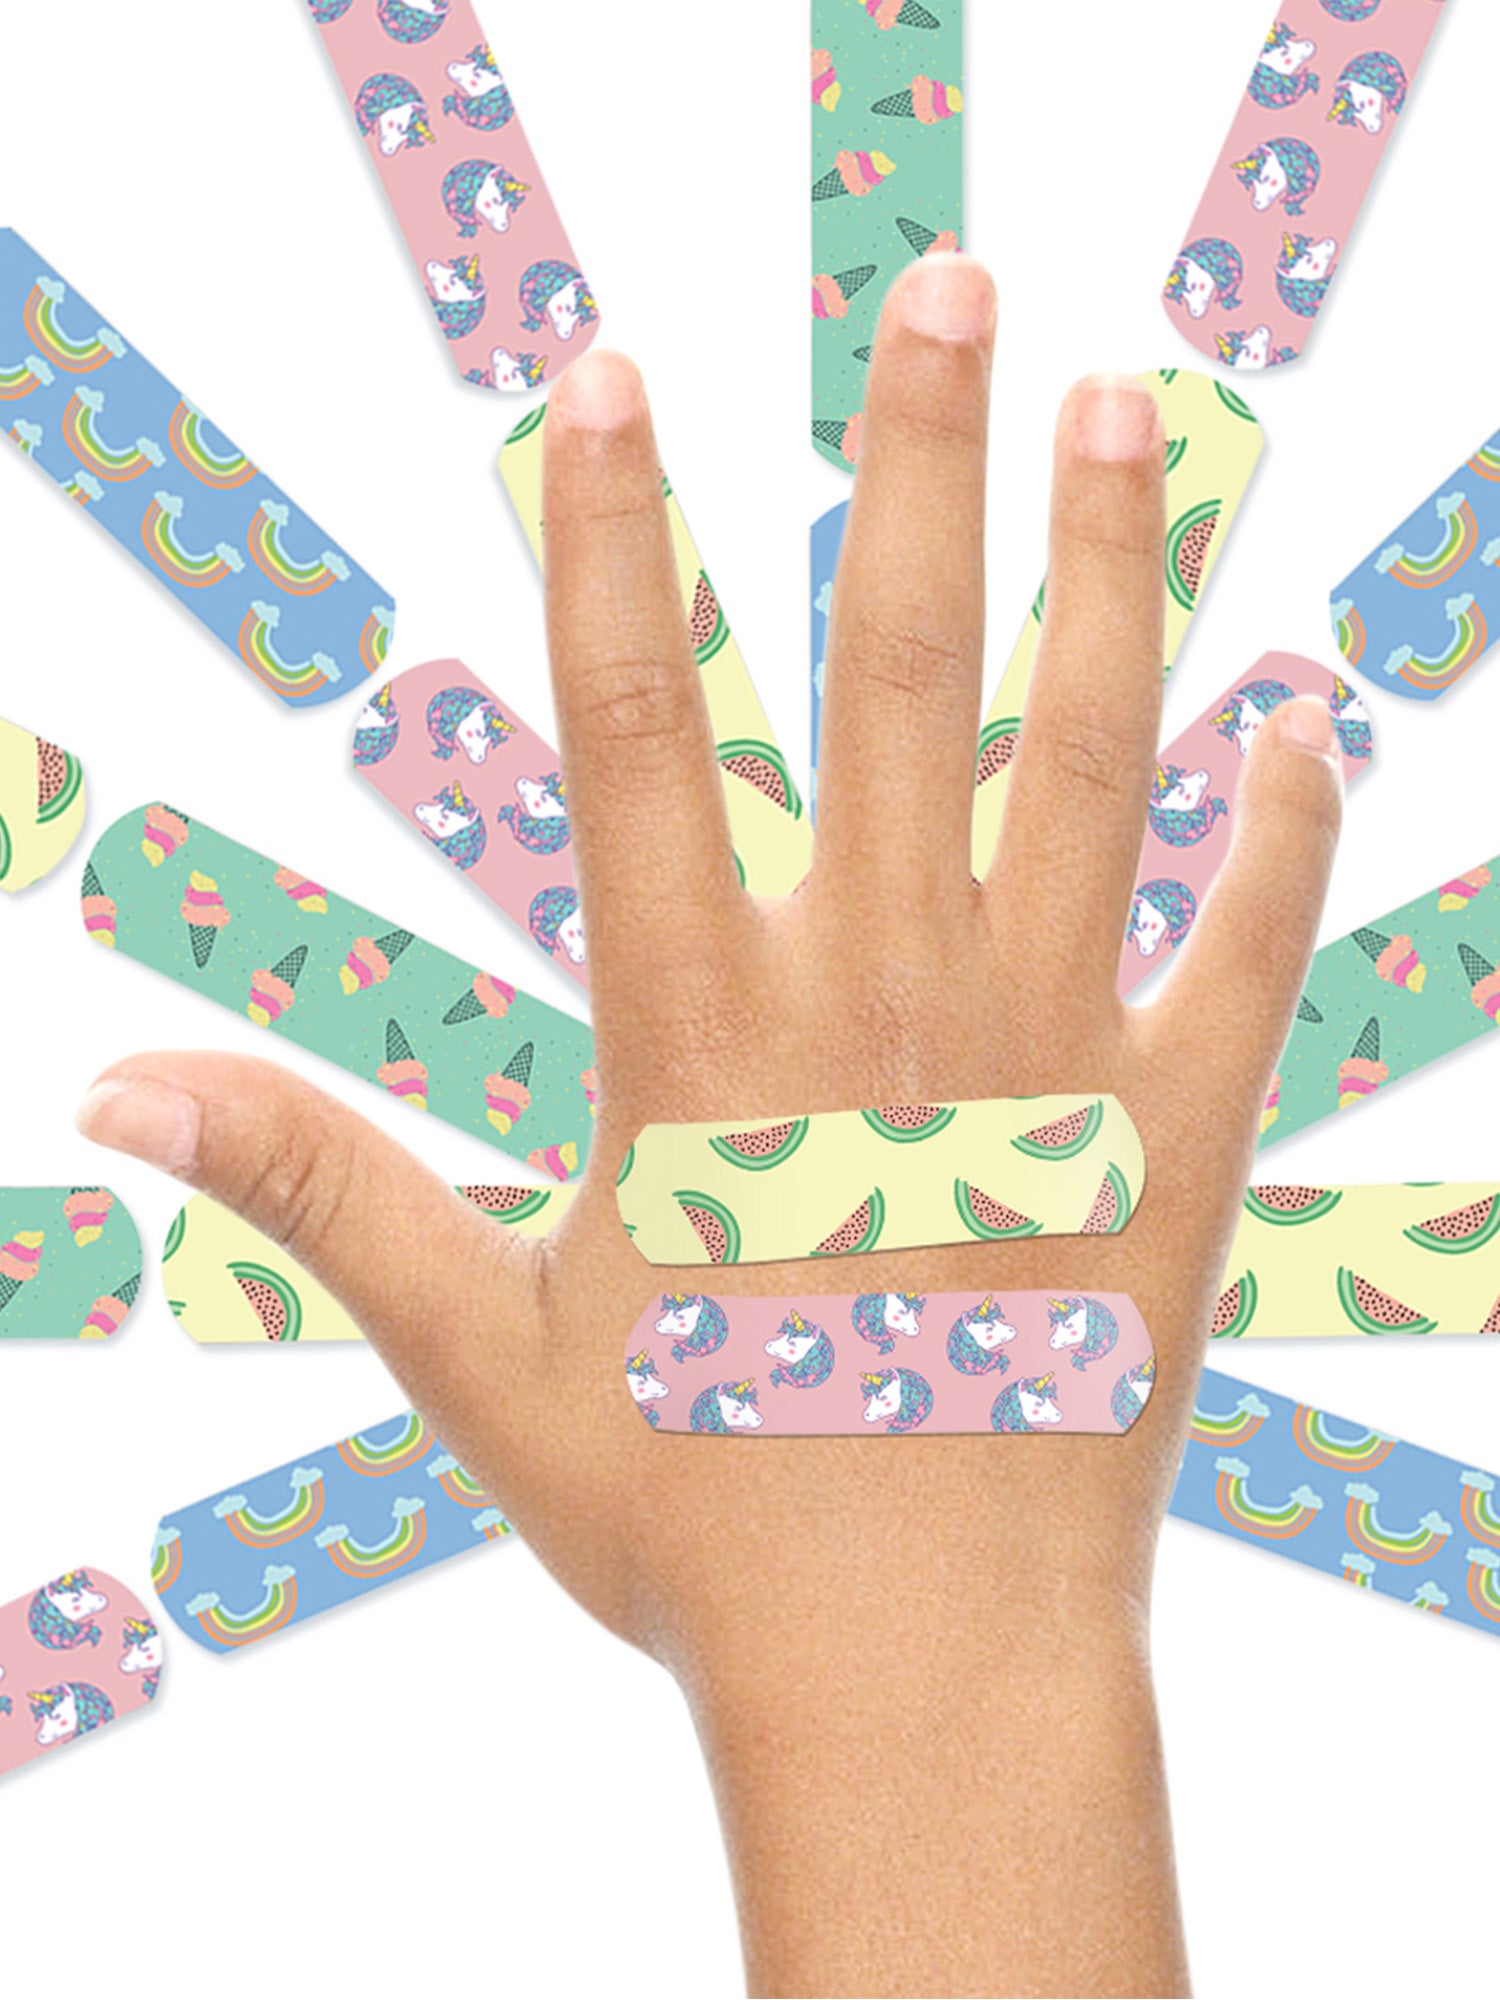 Ouchie Non-Toxic Printed Bandages Triple Combo (60 Pack) - Pink, Lime Green & Lavender